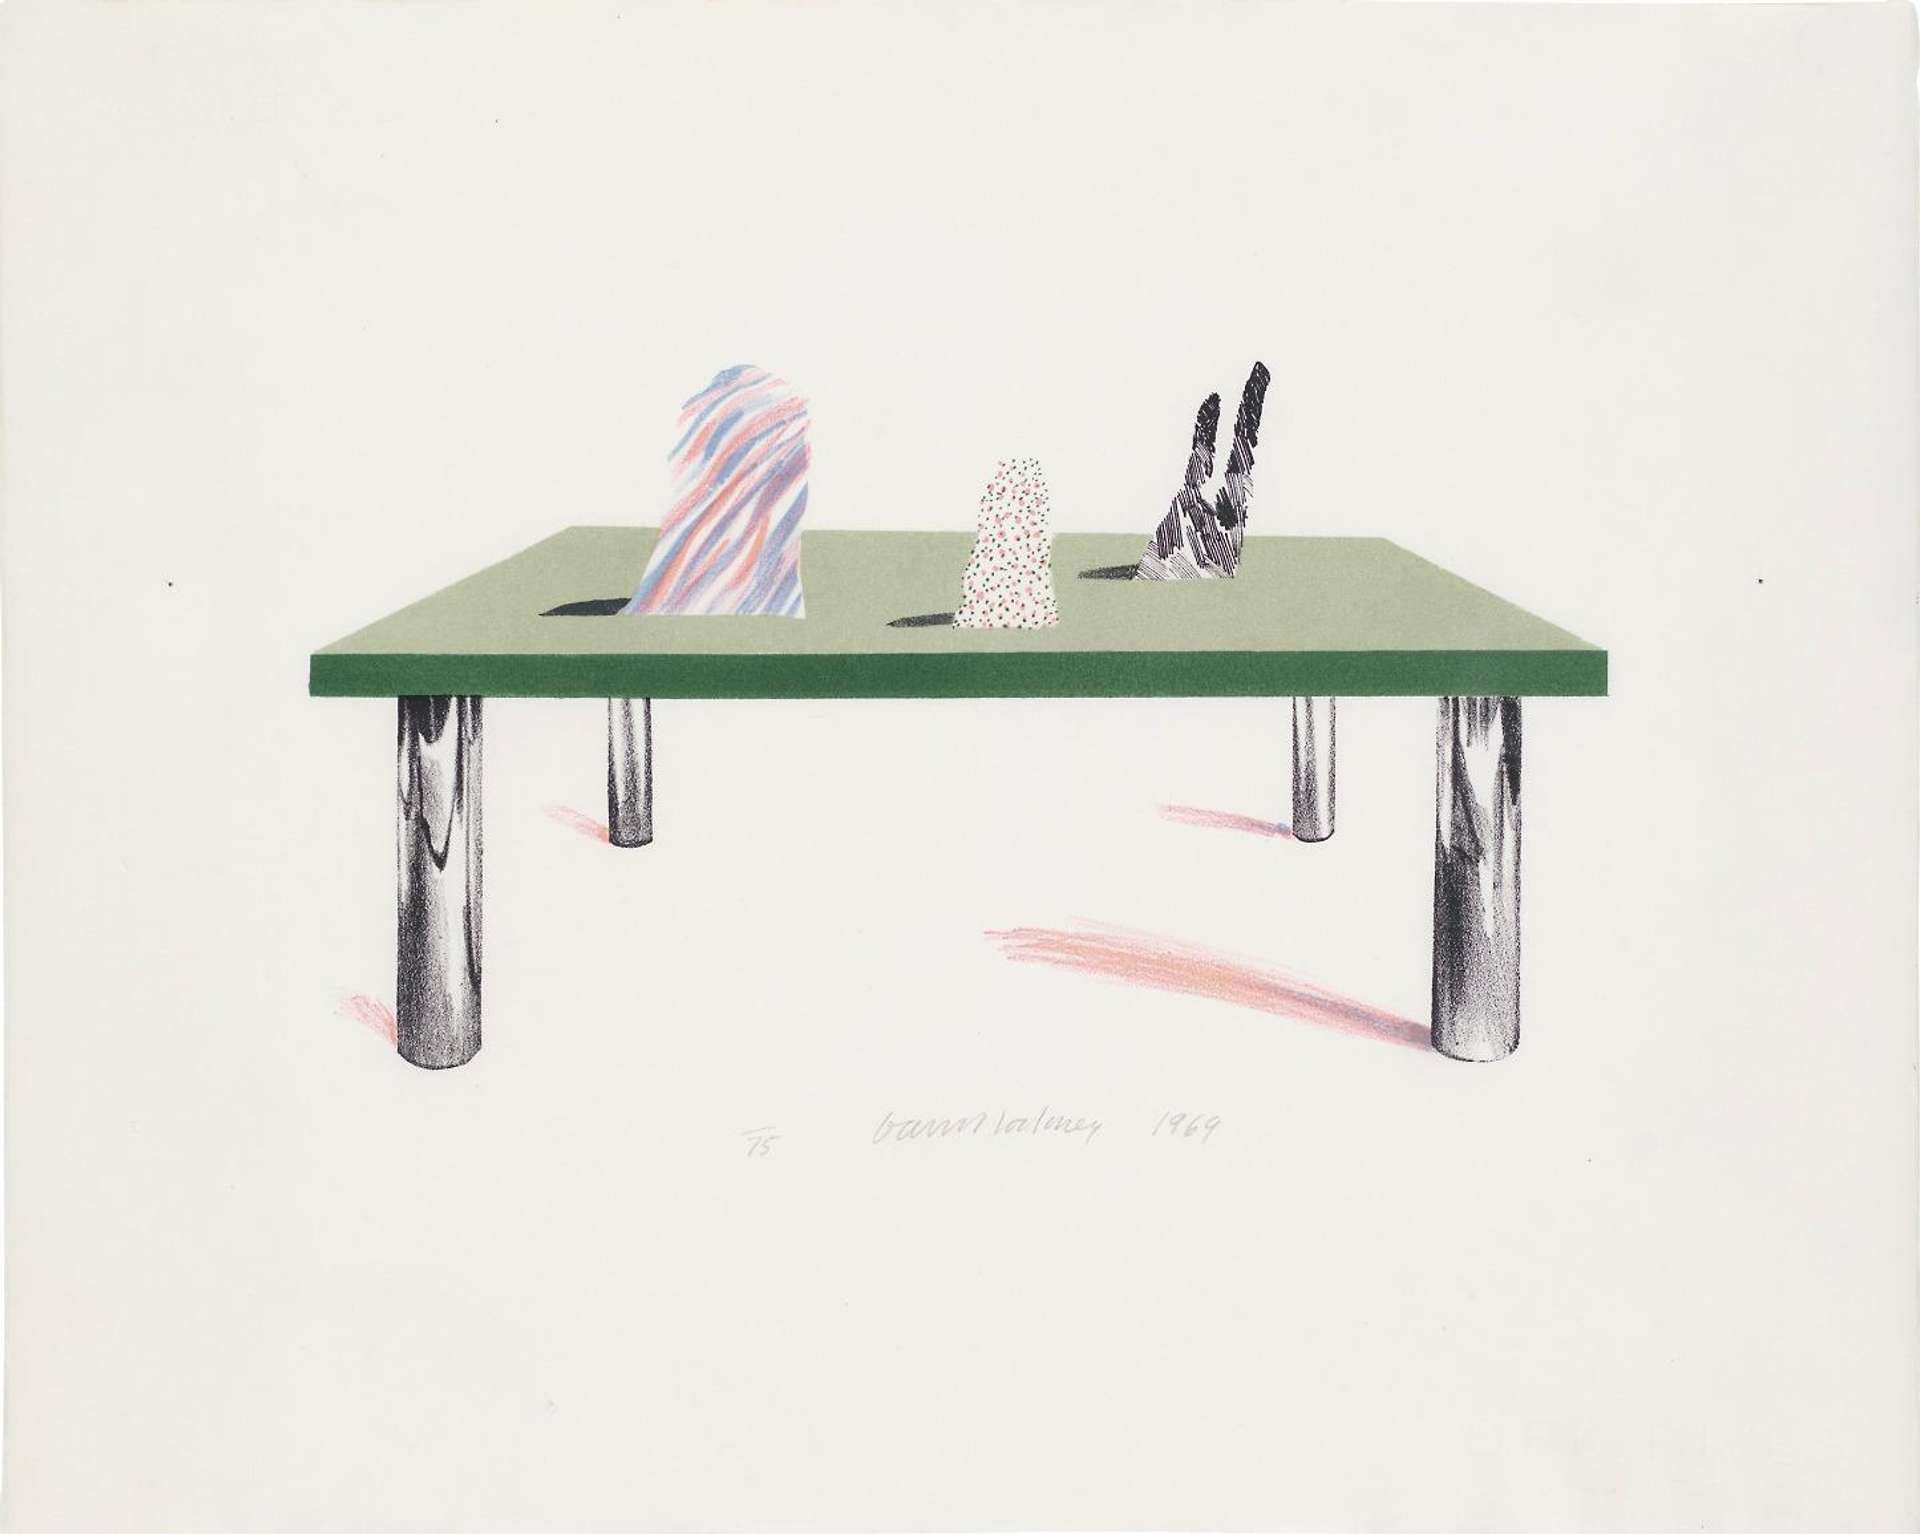 Glass Table With Objects - Signed Print by David Hockney 1969 - MyArtBroker